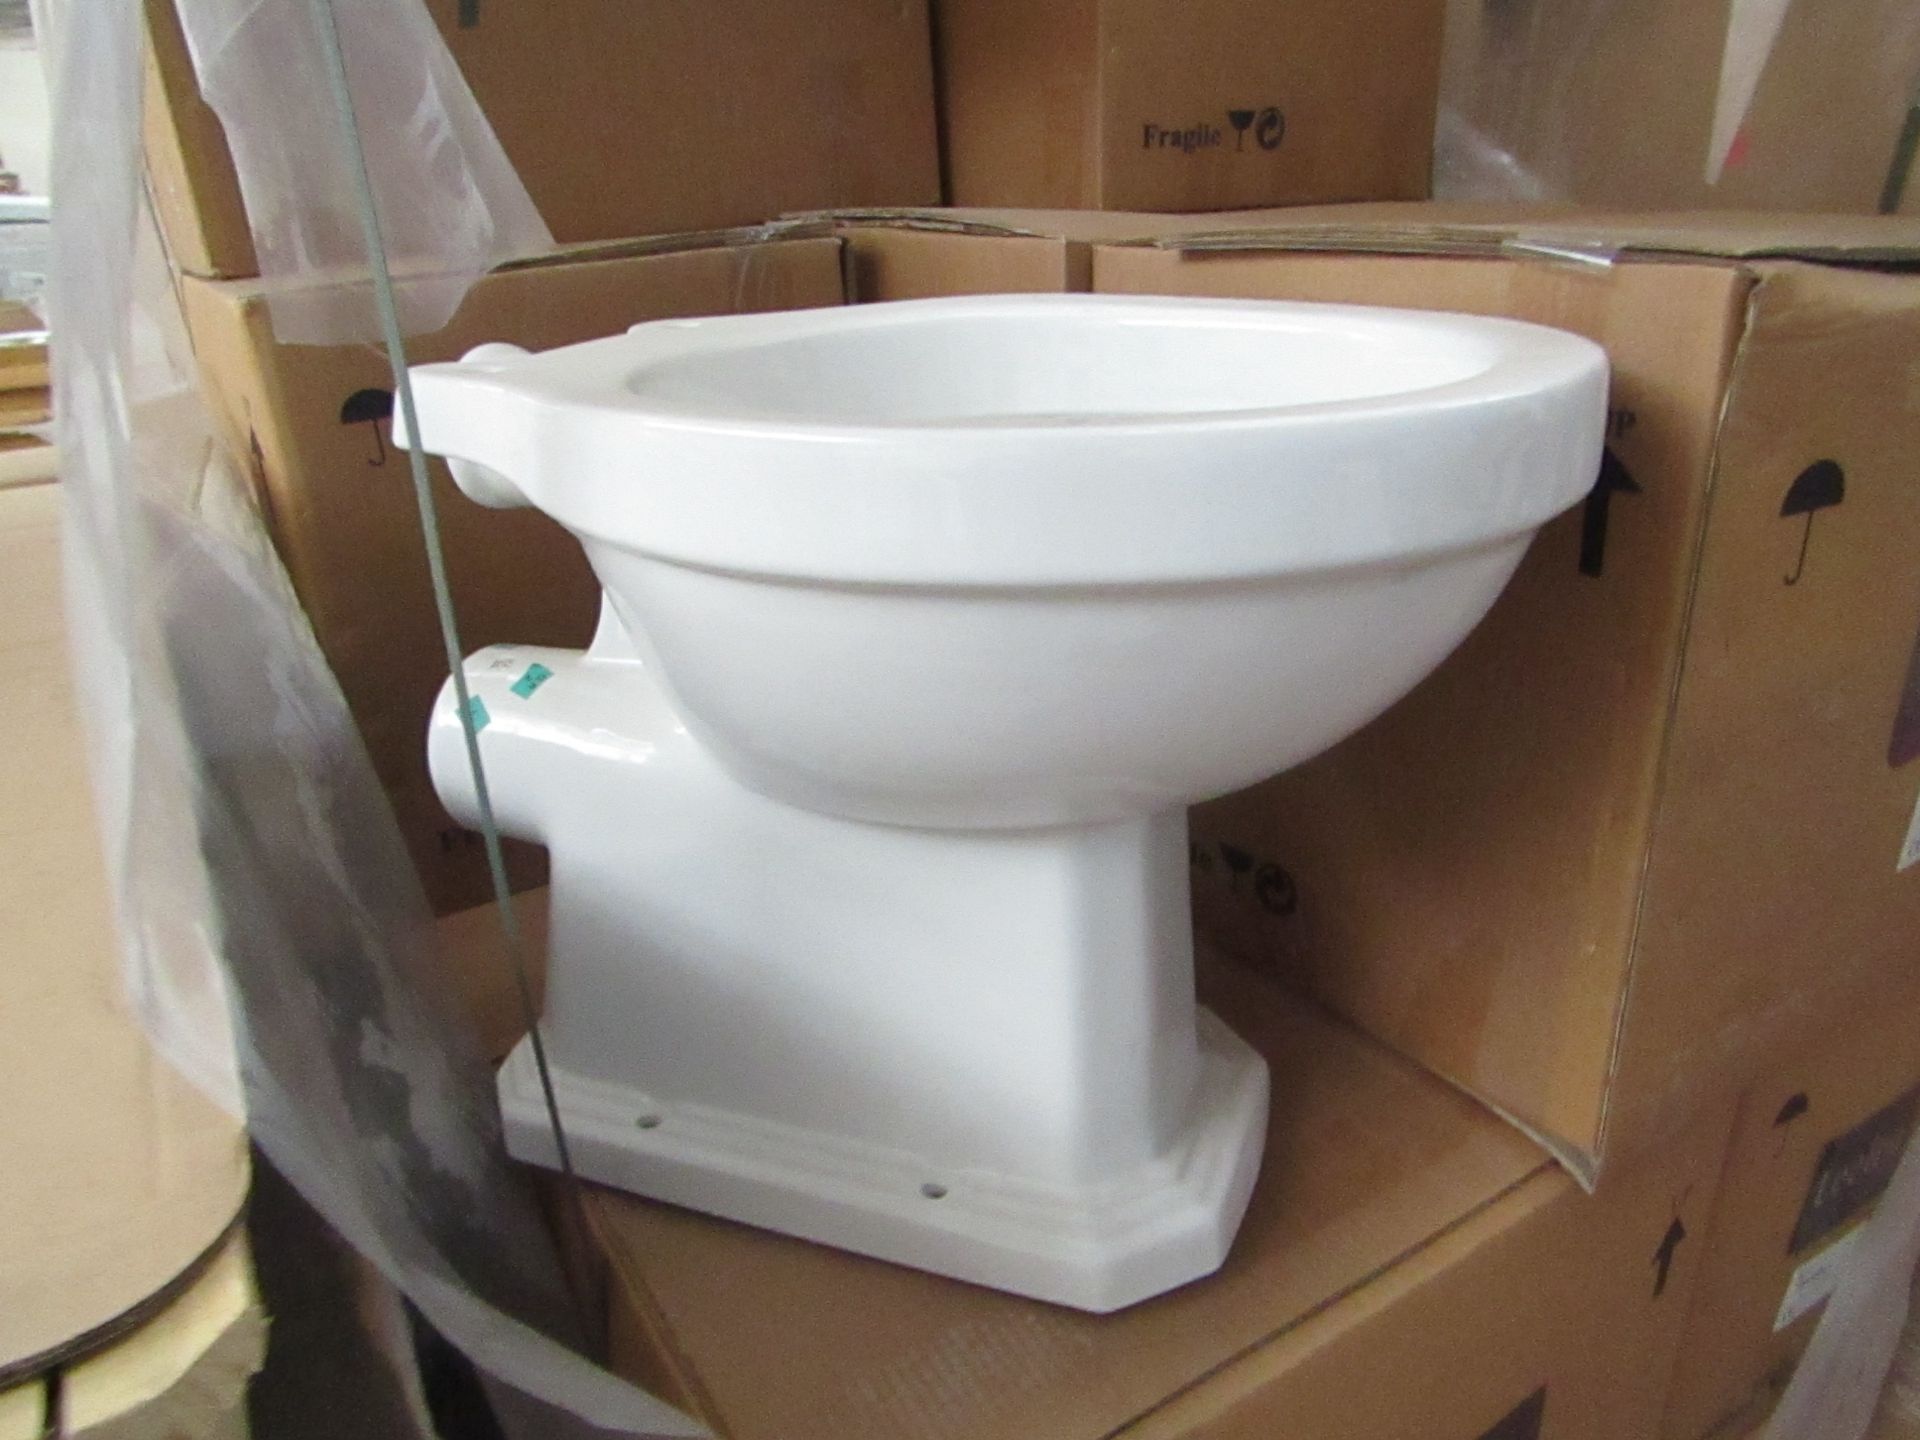 Lecico New Hamilton Low Level toilet pan, unused and boxed, more may be available to the winning